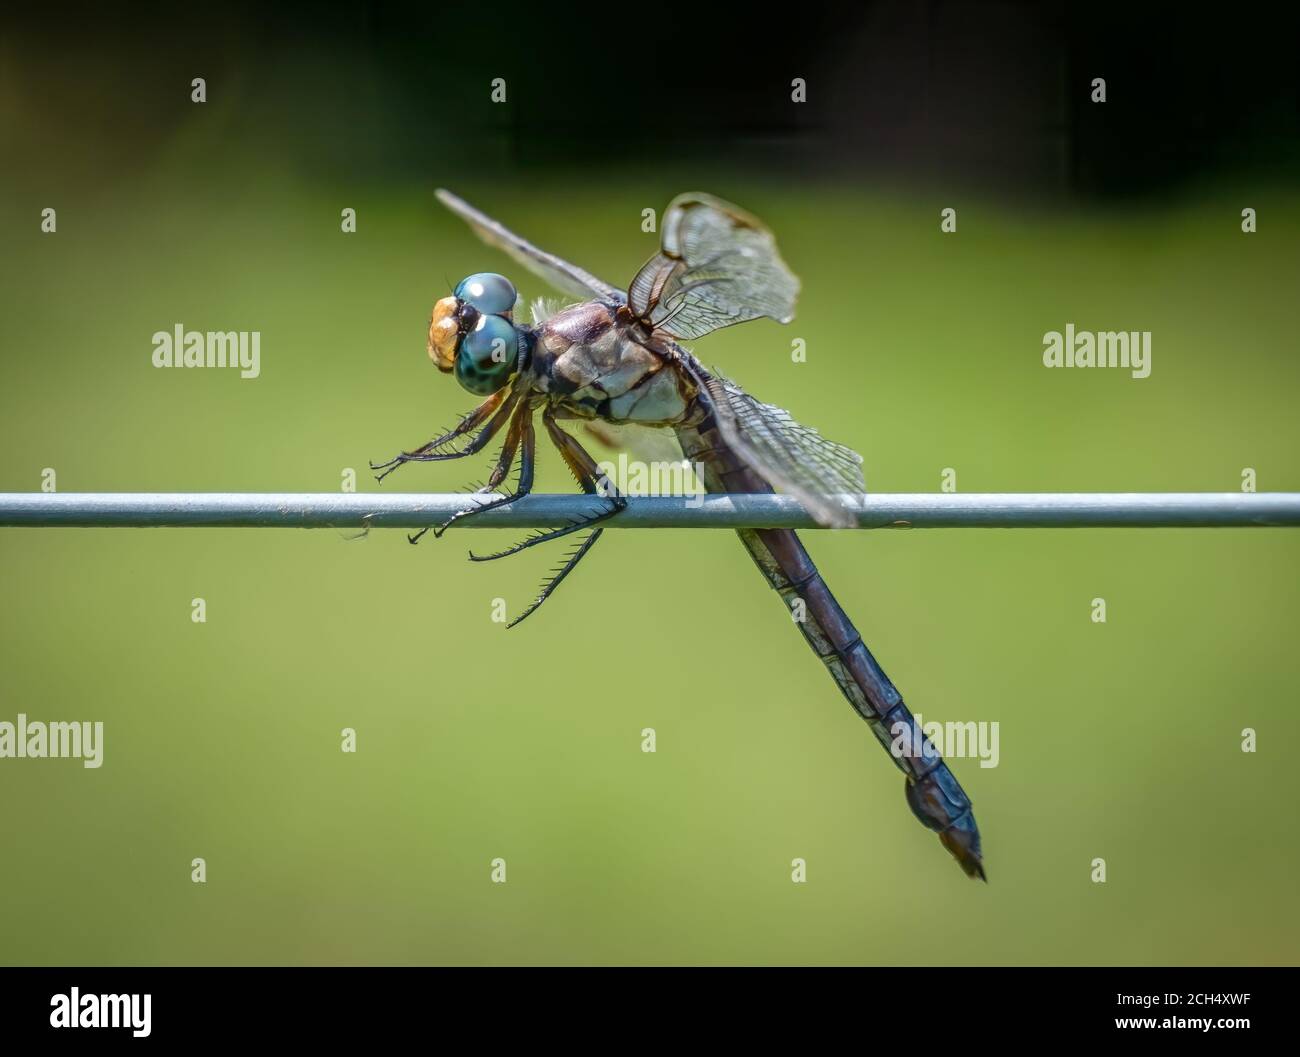 A female Great Blue Skimmer (Libellula vibrans) perched on a fence. Seems to be praying for something it doesn't deserve. Meme. Stock Photo